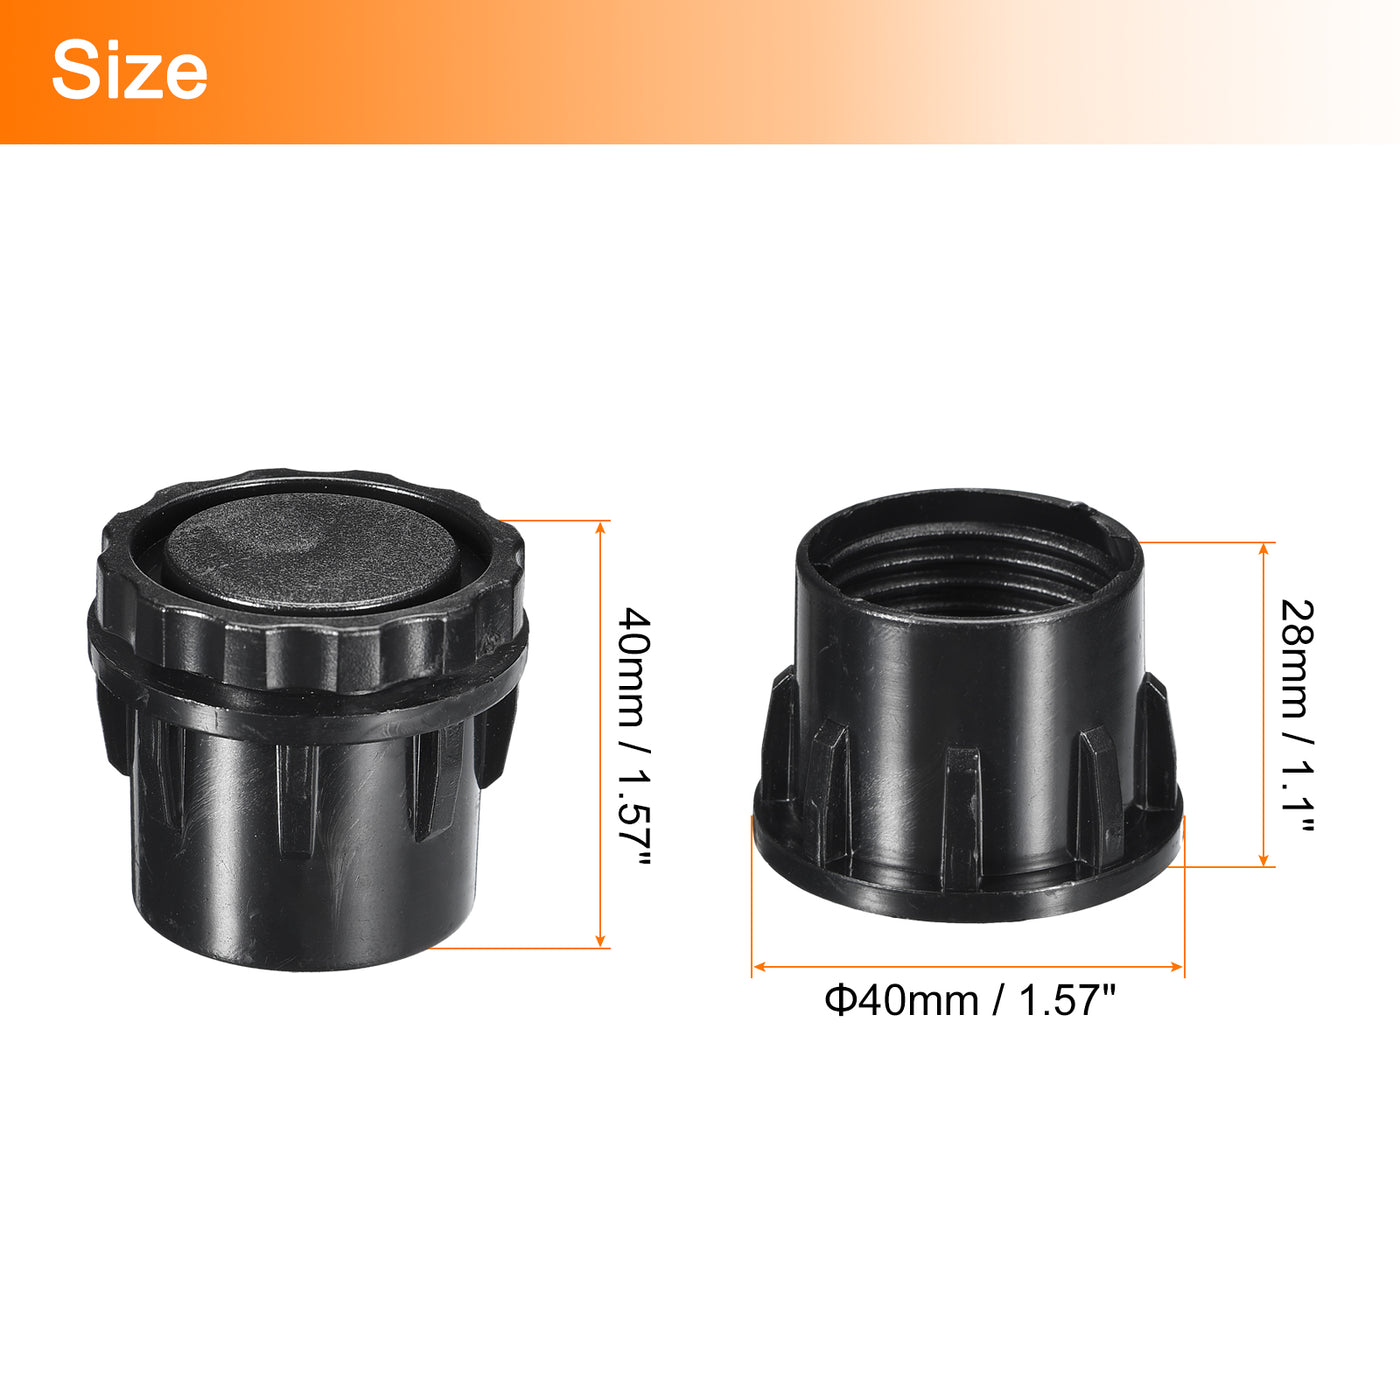 uxcell Uxcell 4Pcs Inserts for Round Tubes with Leveling Feet, for 40mm/1.57" Dia Round Tube